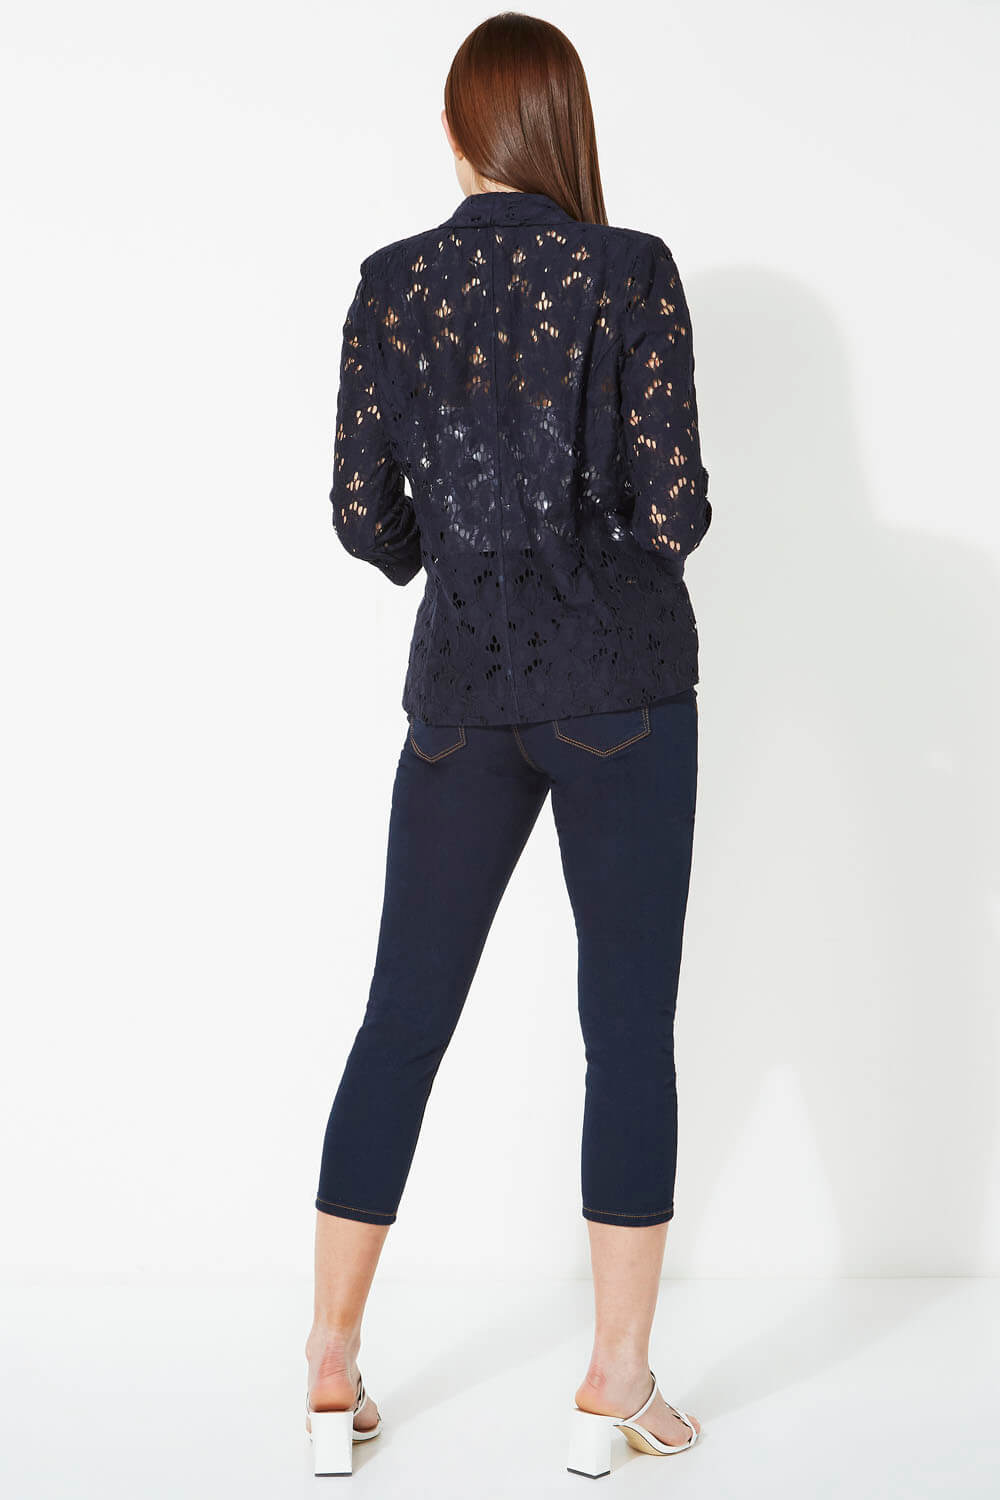 Navy  Floral Lace 3/4 Sleeve Jacket, Image 4 of 4